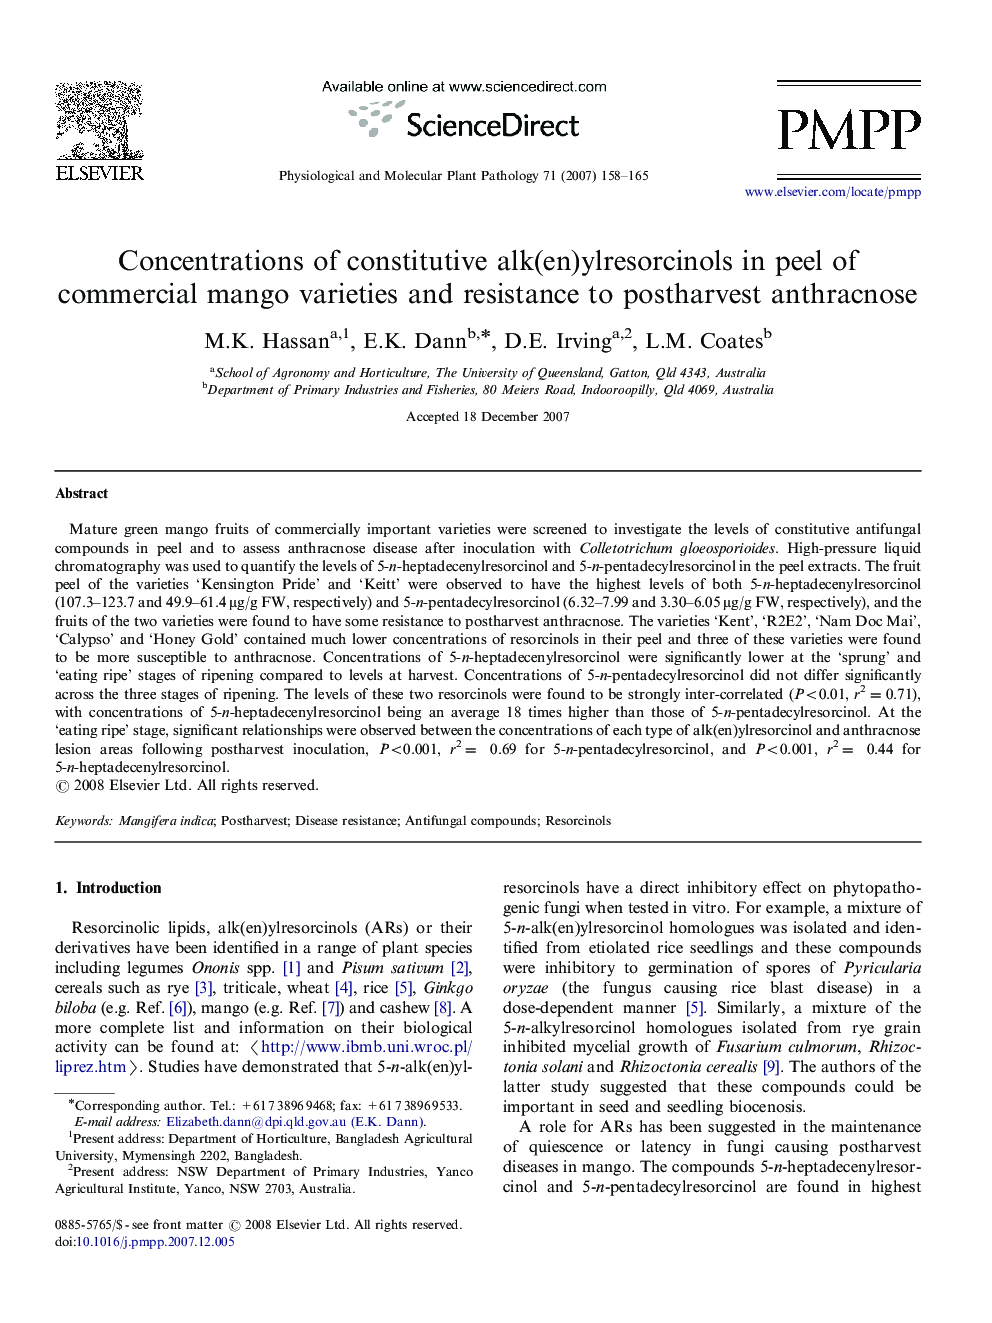 Concentrations of constitutive alk(en)ylresorcinols in peel of commercial mango varieties and resistance to postharvest anthracnose